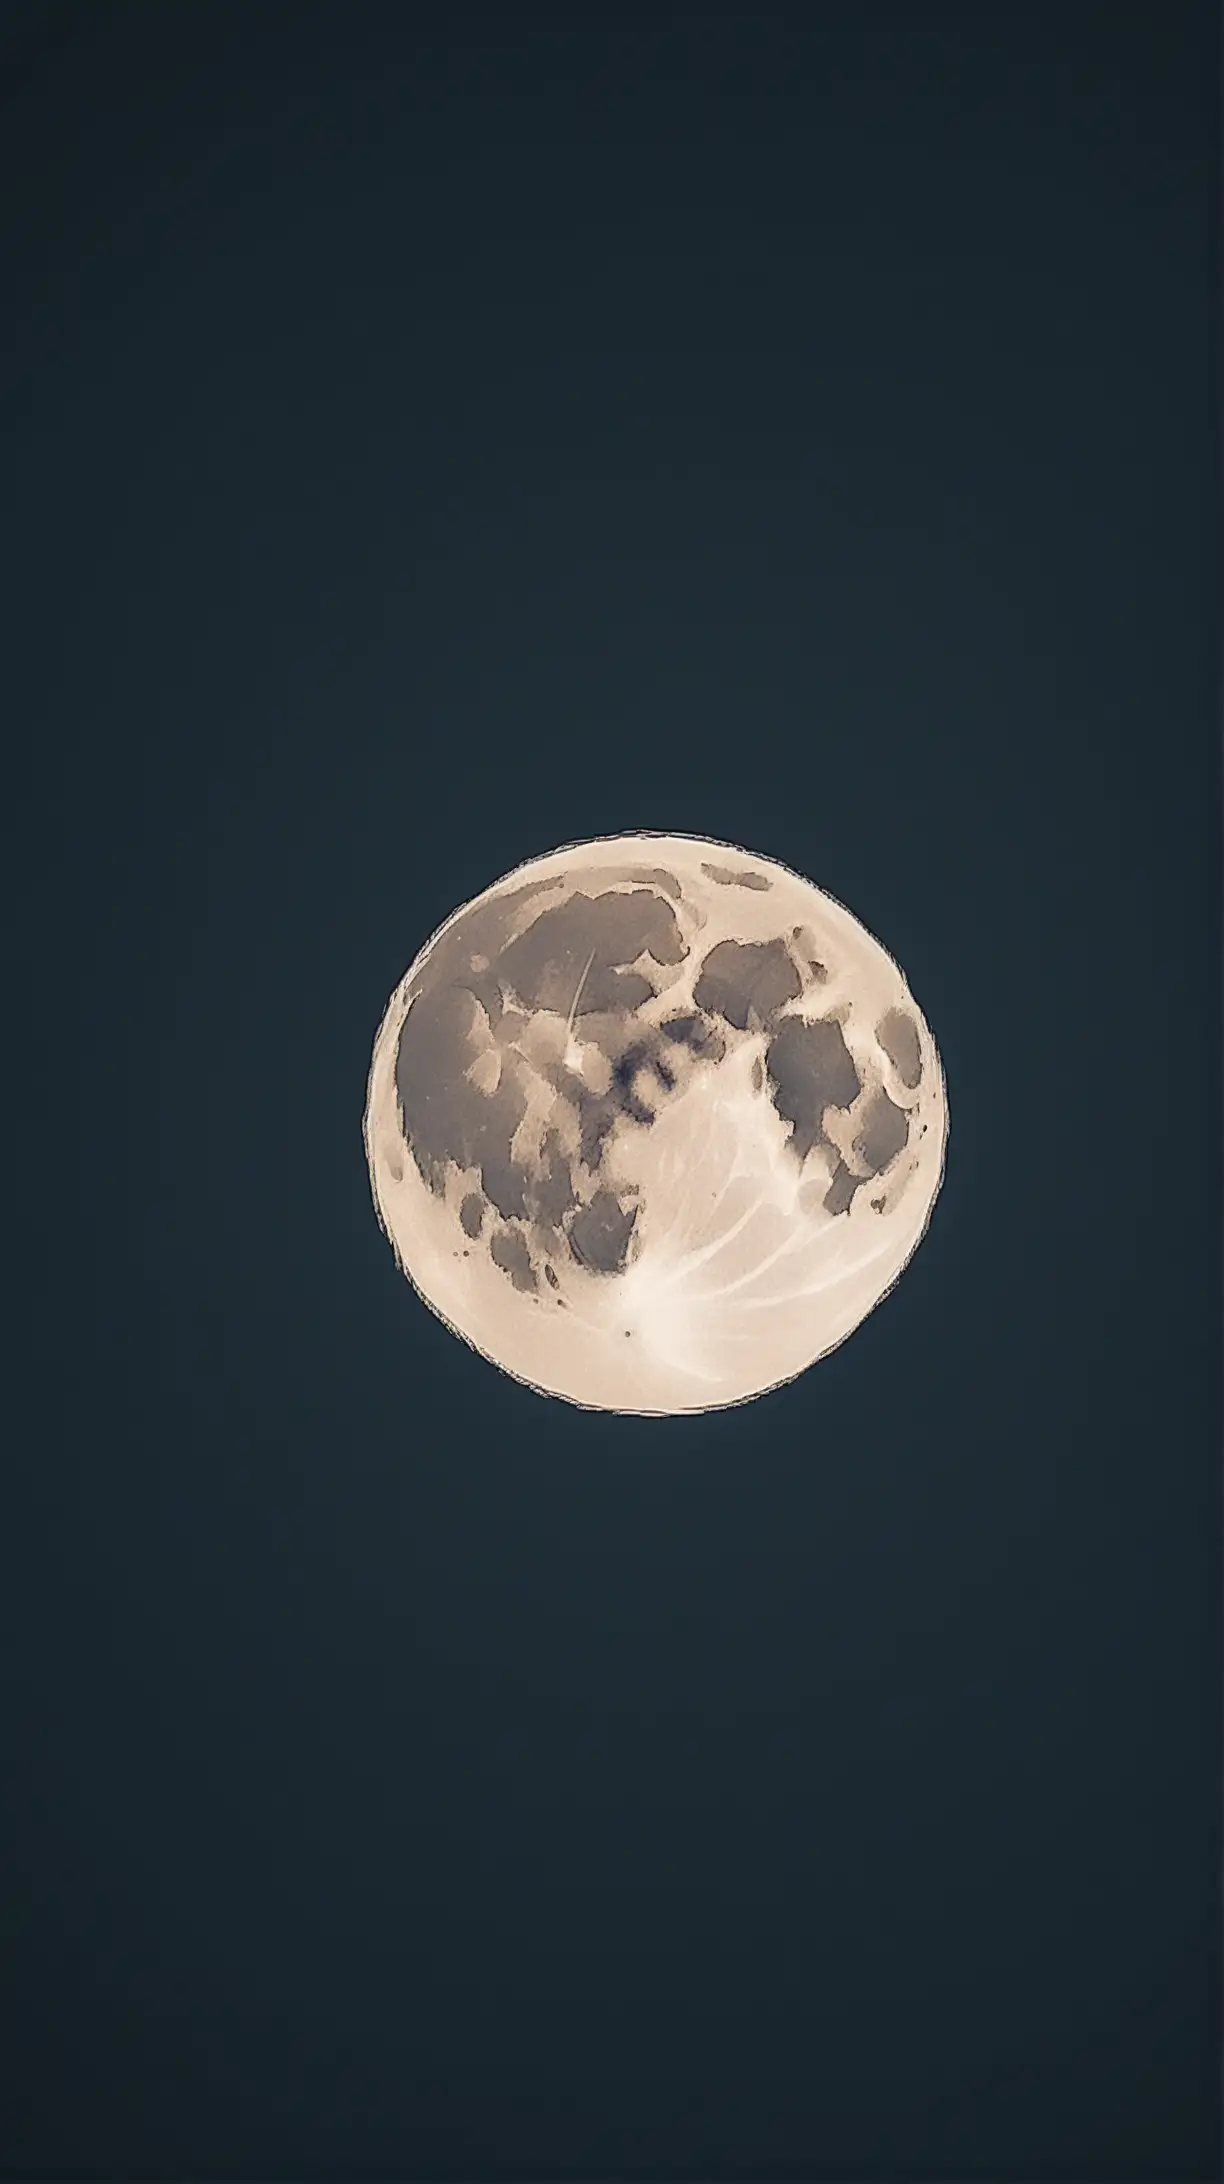 Full  moon.  Simple background
